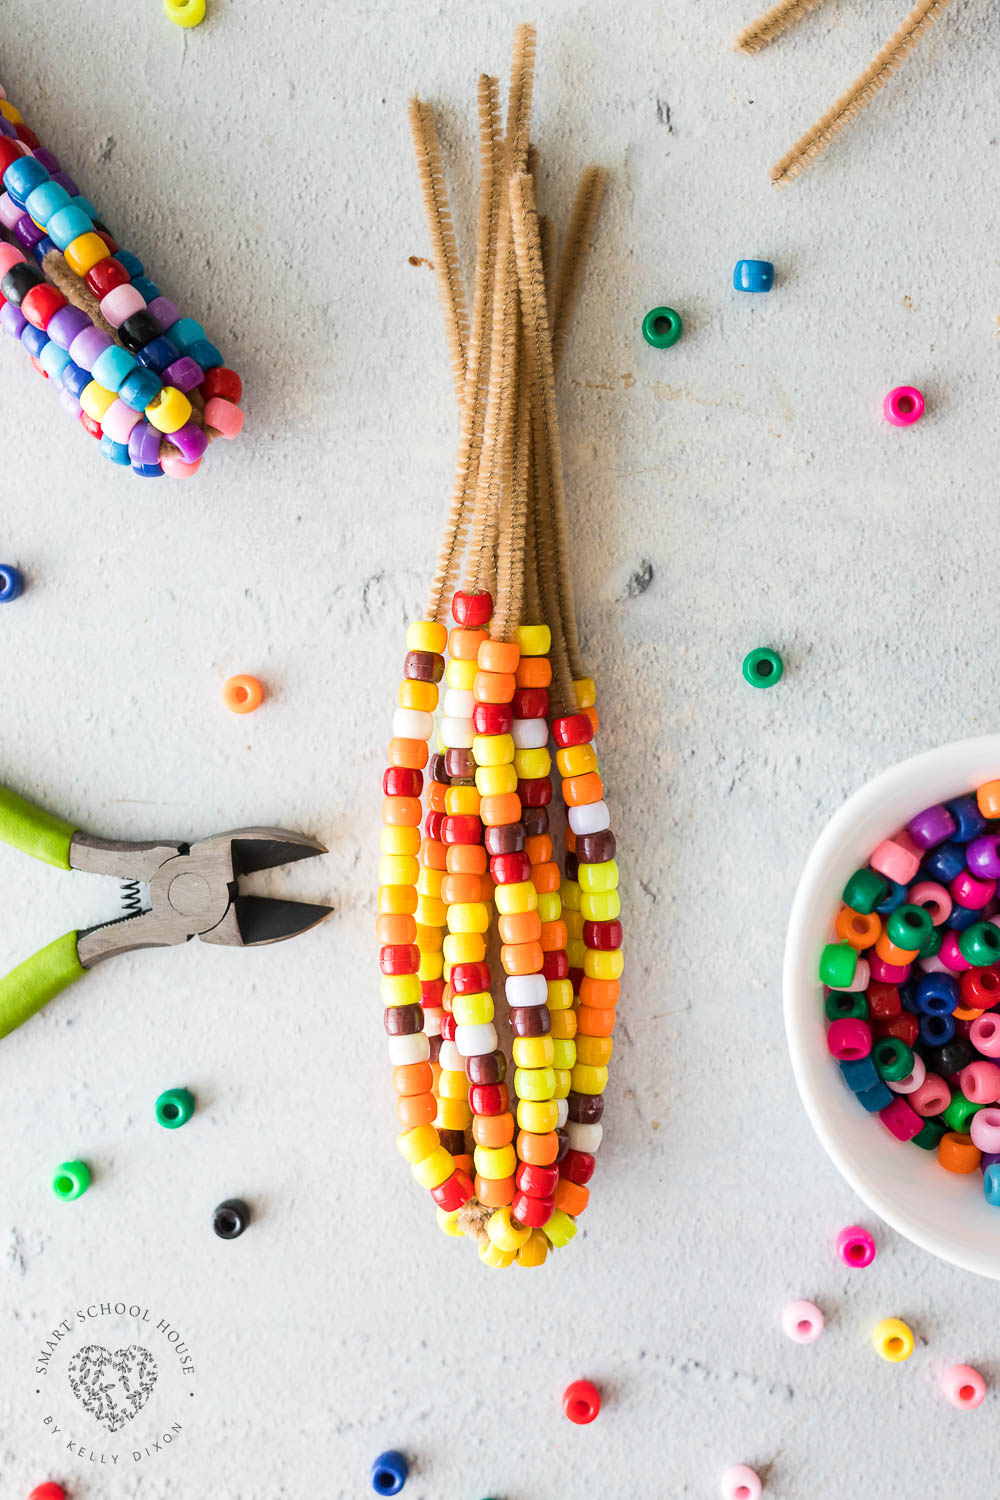 Making corn with beads